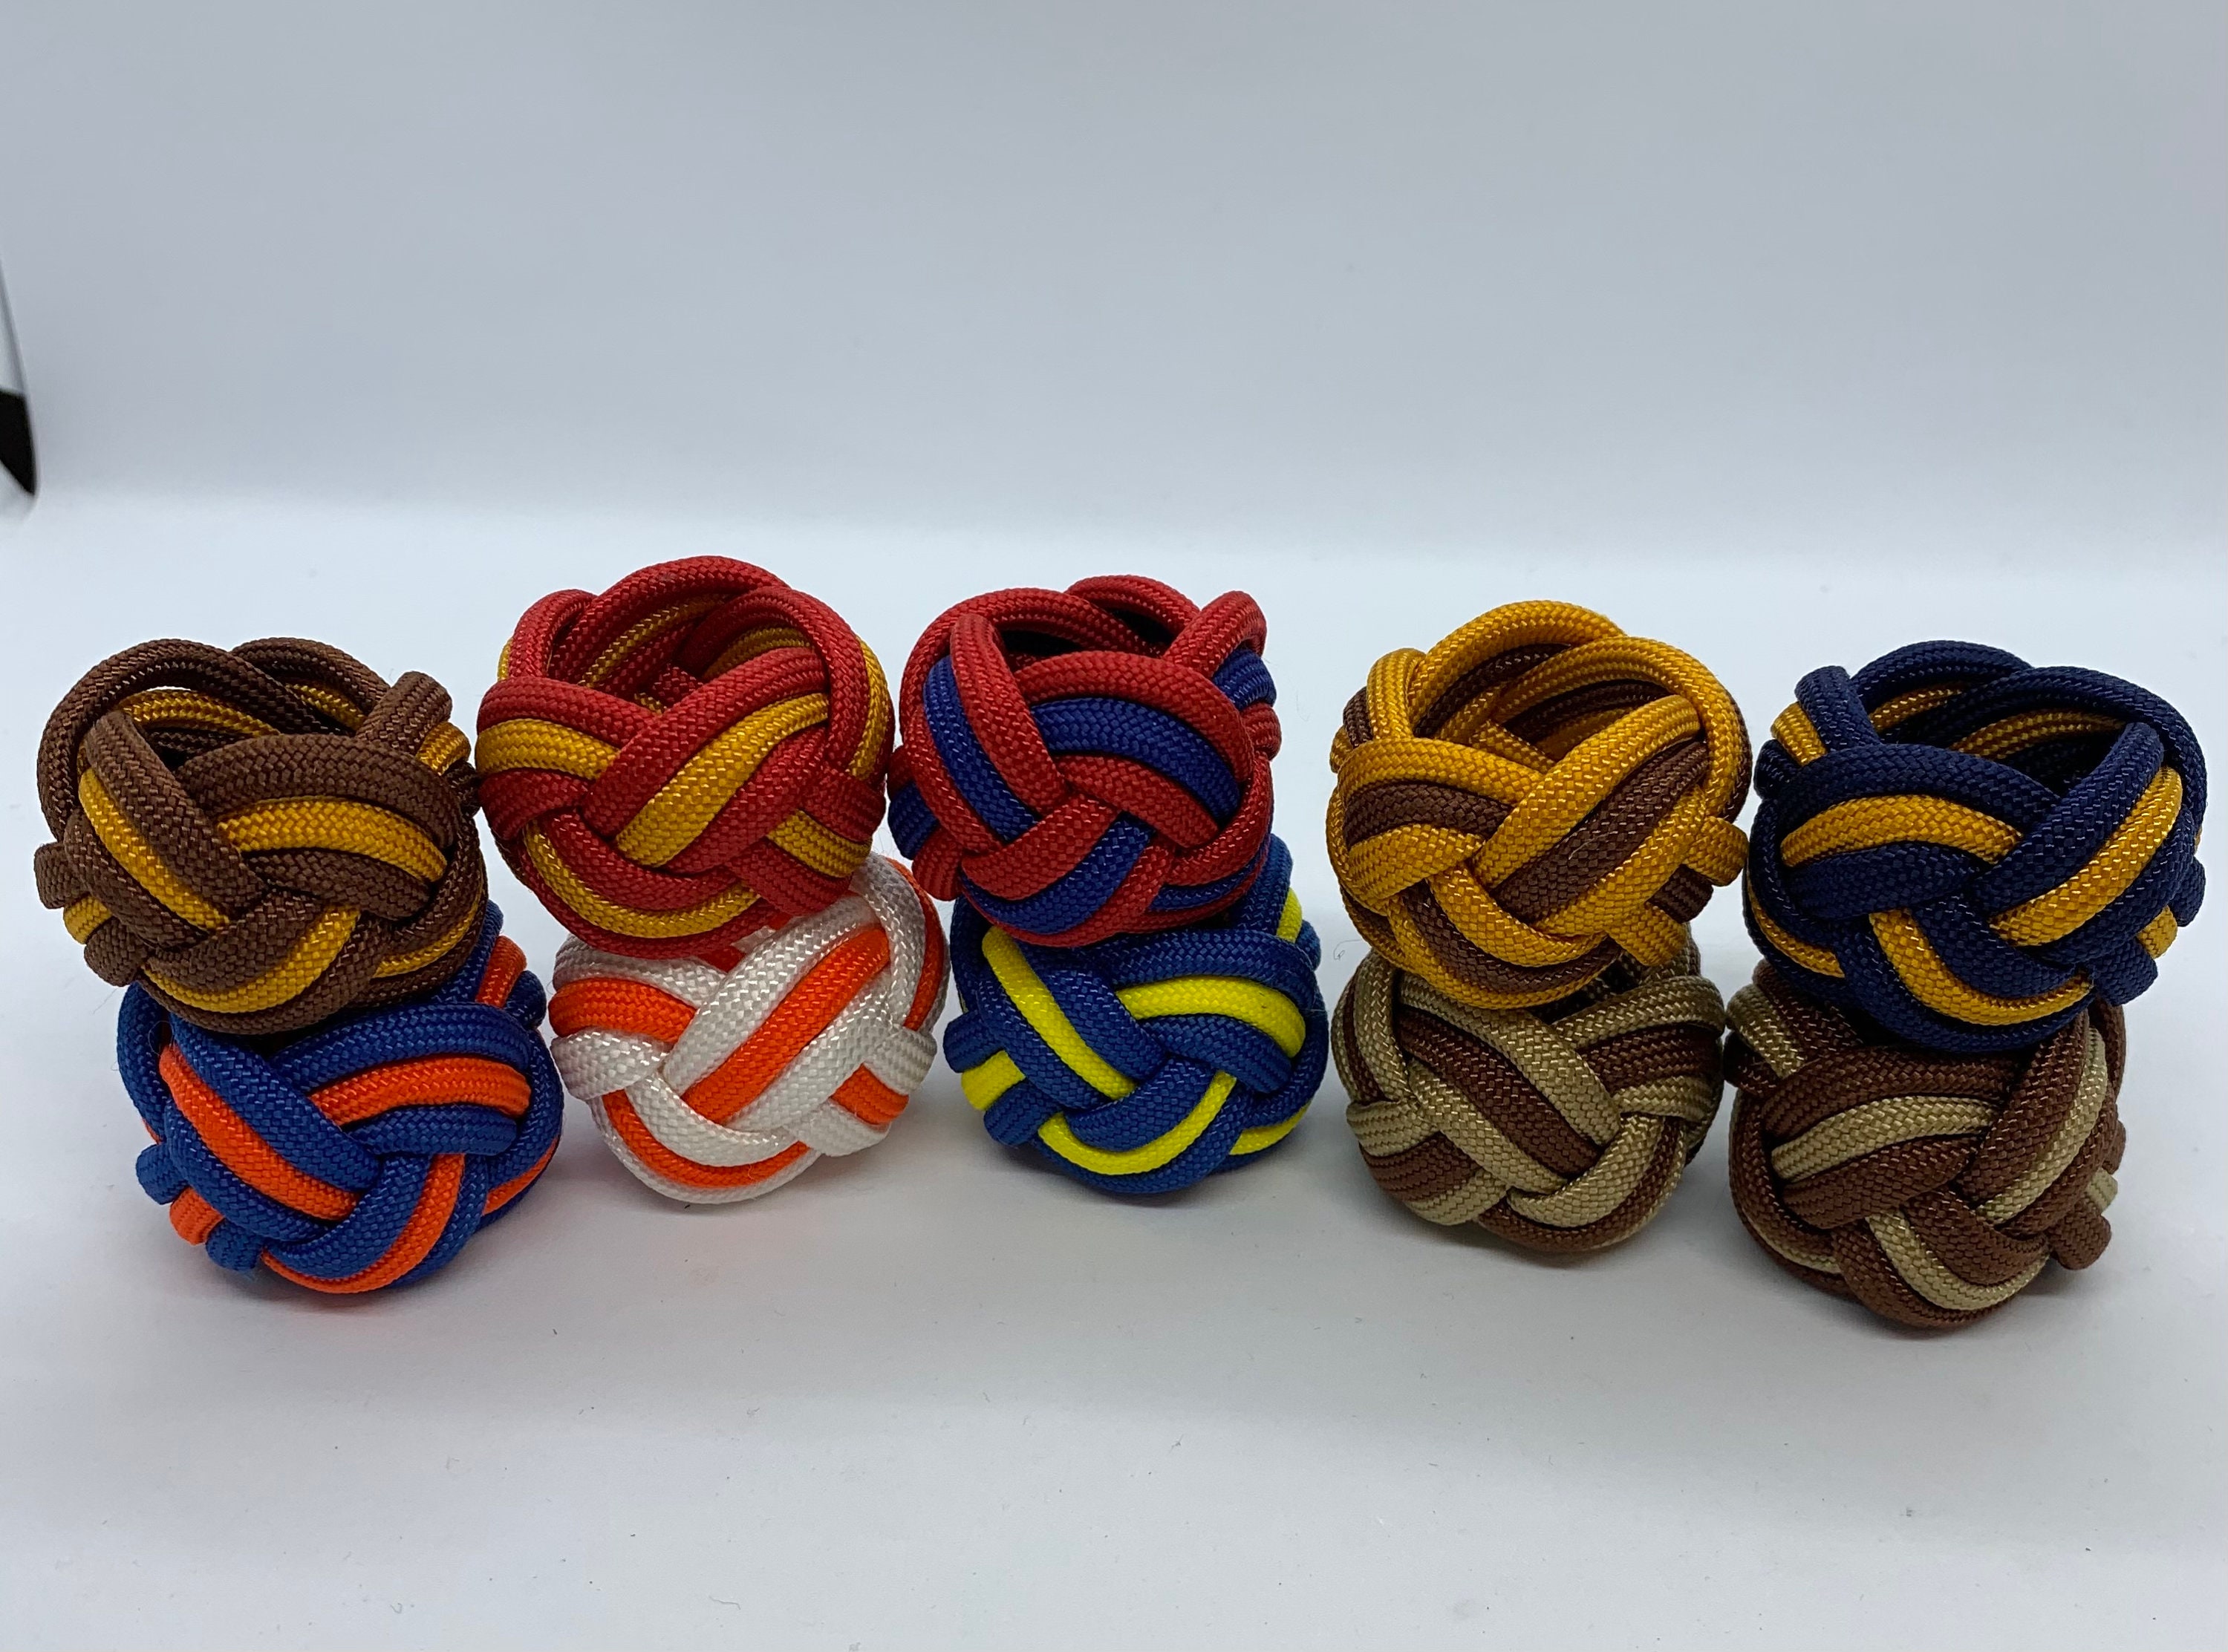 Handmade Scout Neckerchief Slide Woggle Paracord Turks Head Knot Red Green Yellow Blue 